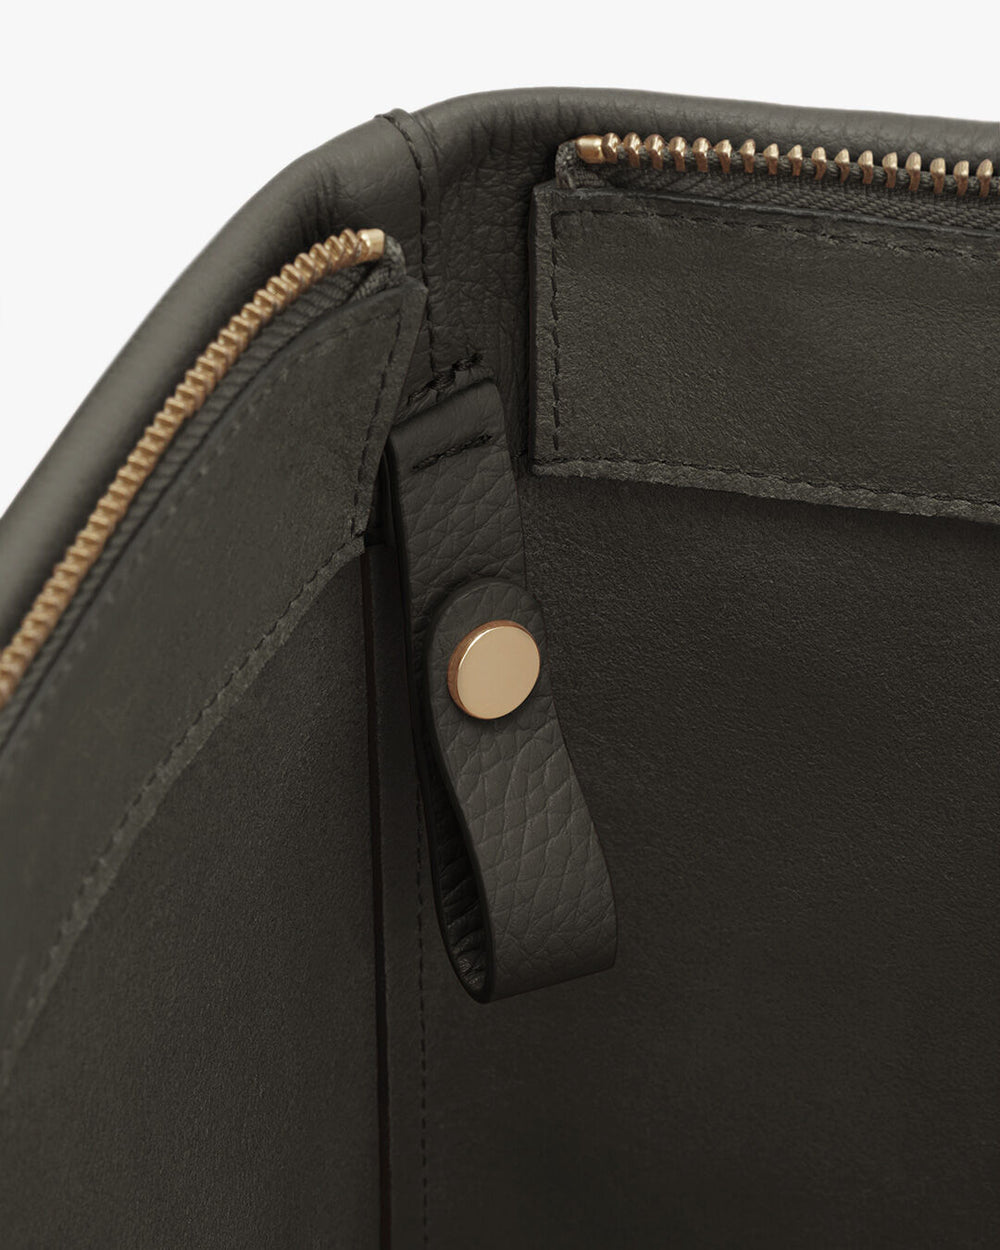 Close-up of a bag with zipper and snap fastener